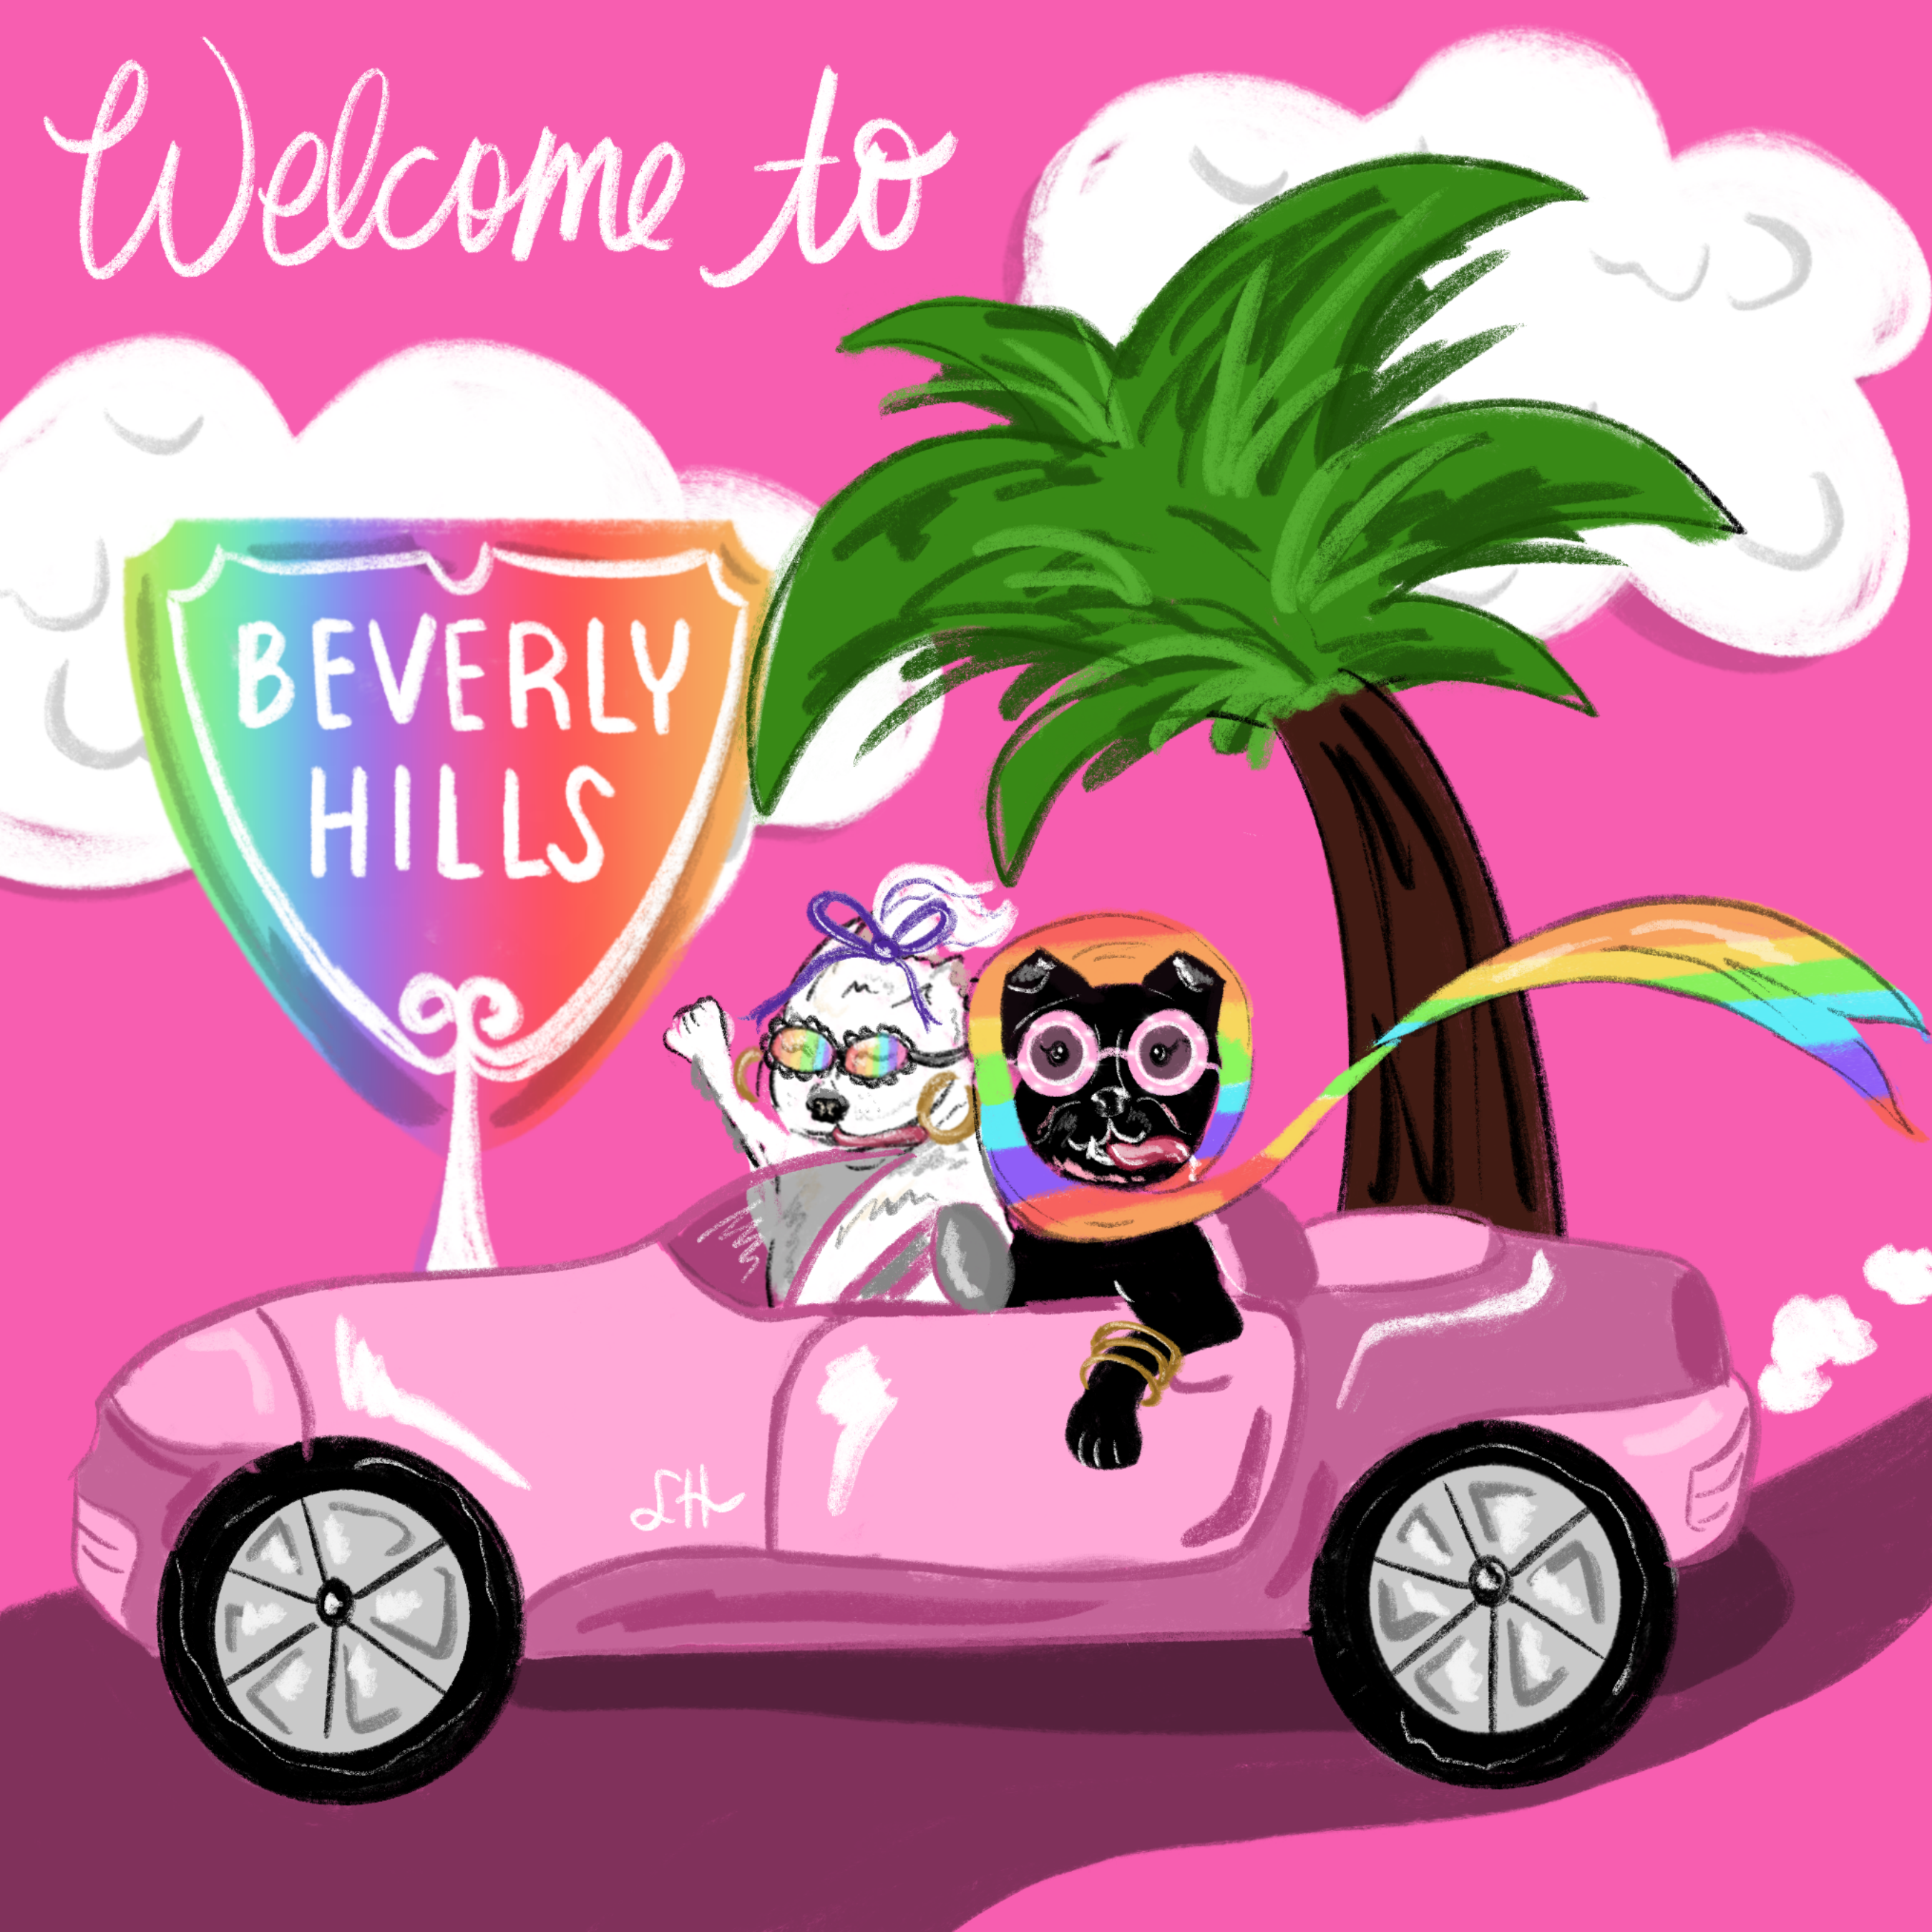 Welcome to Beverly Hills Greeting Card